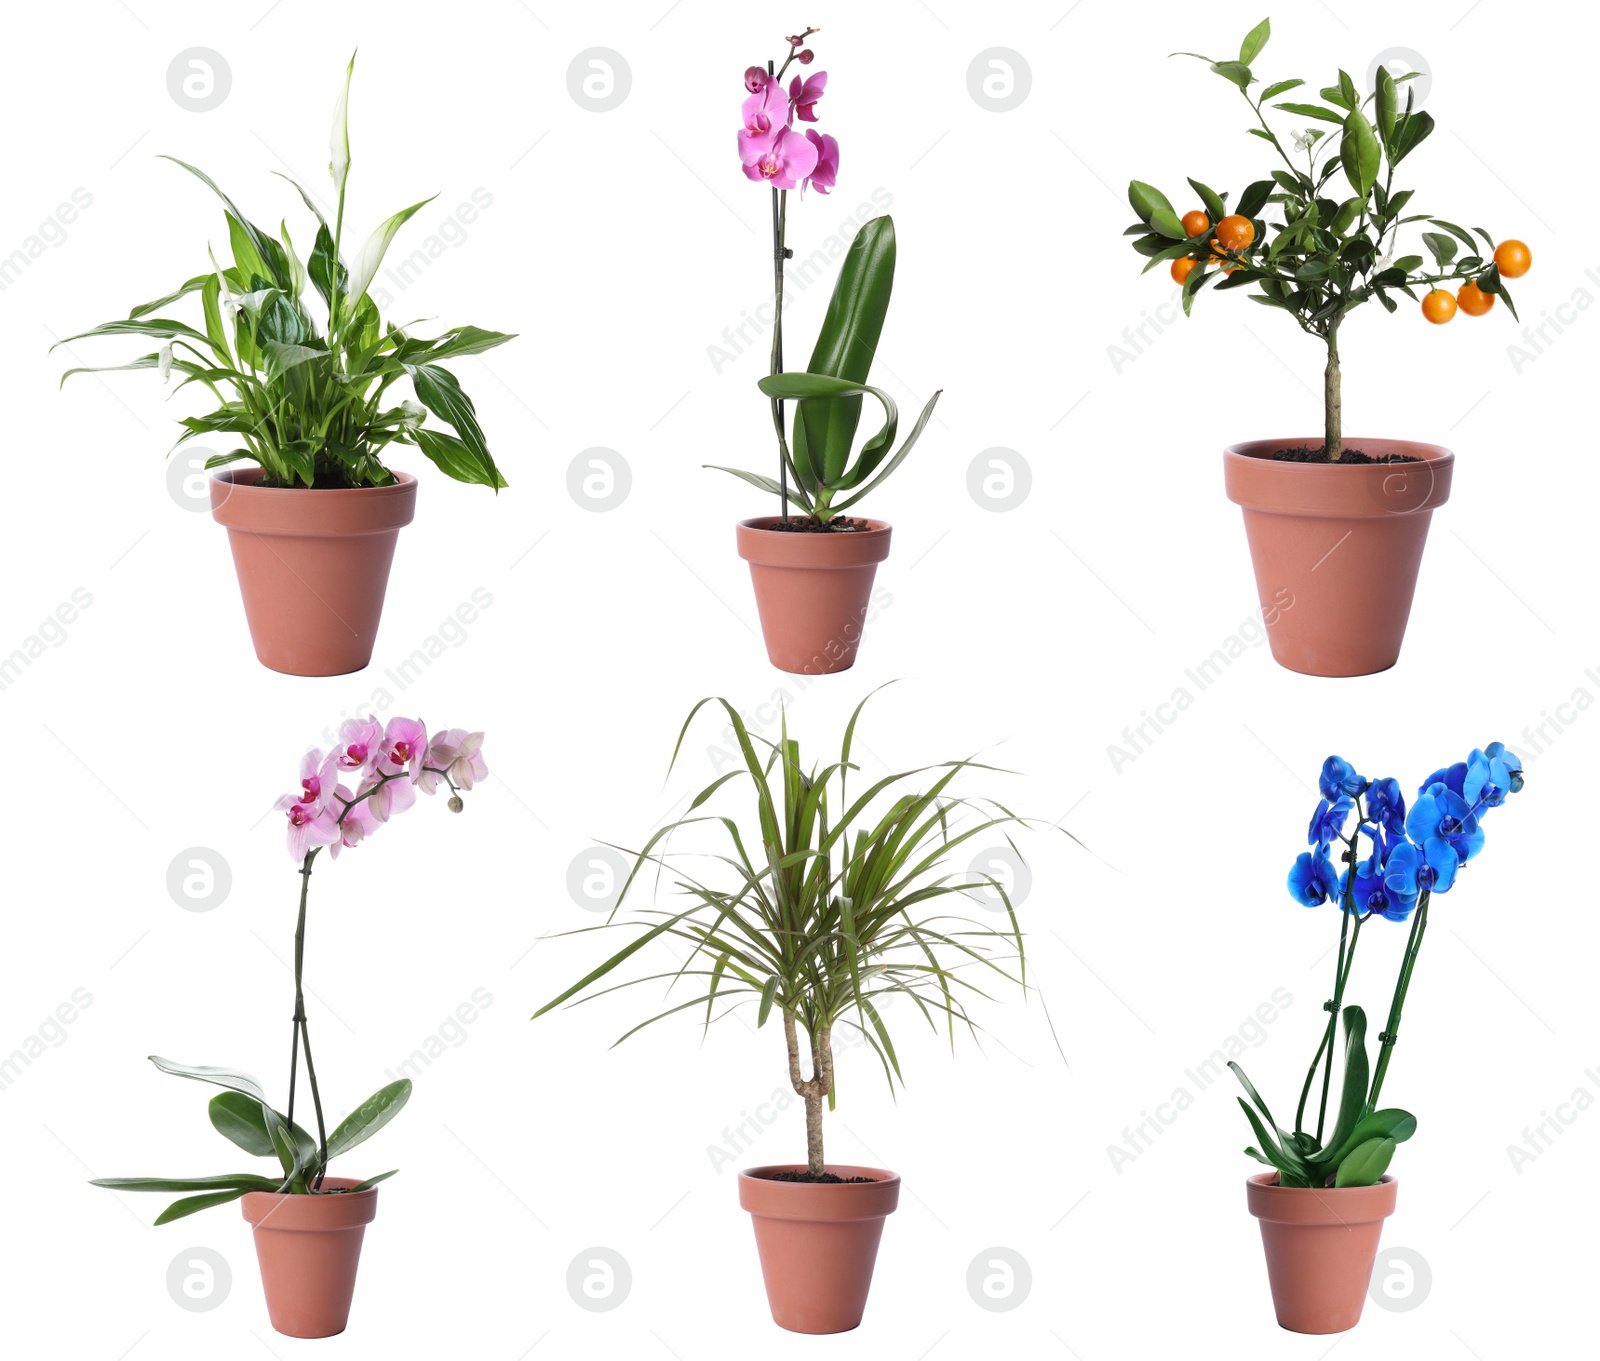 Image of Set of different houseplants in flower pots on white background